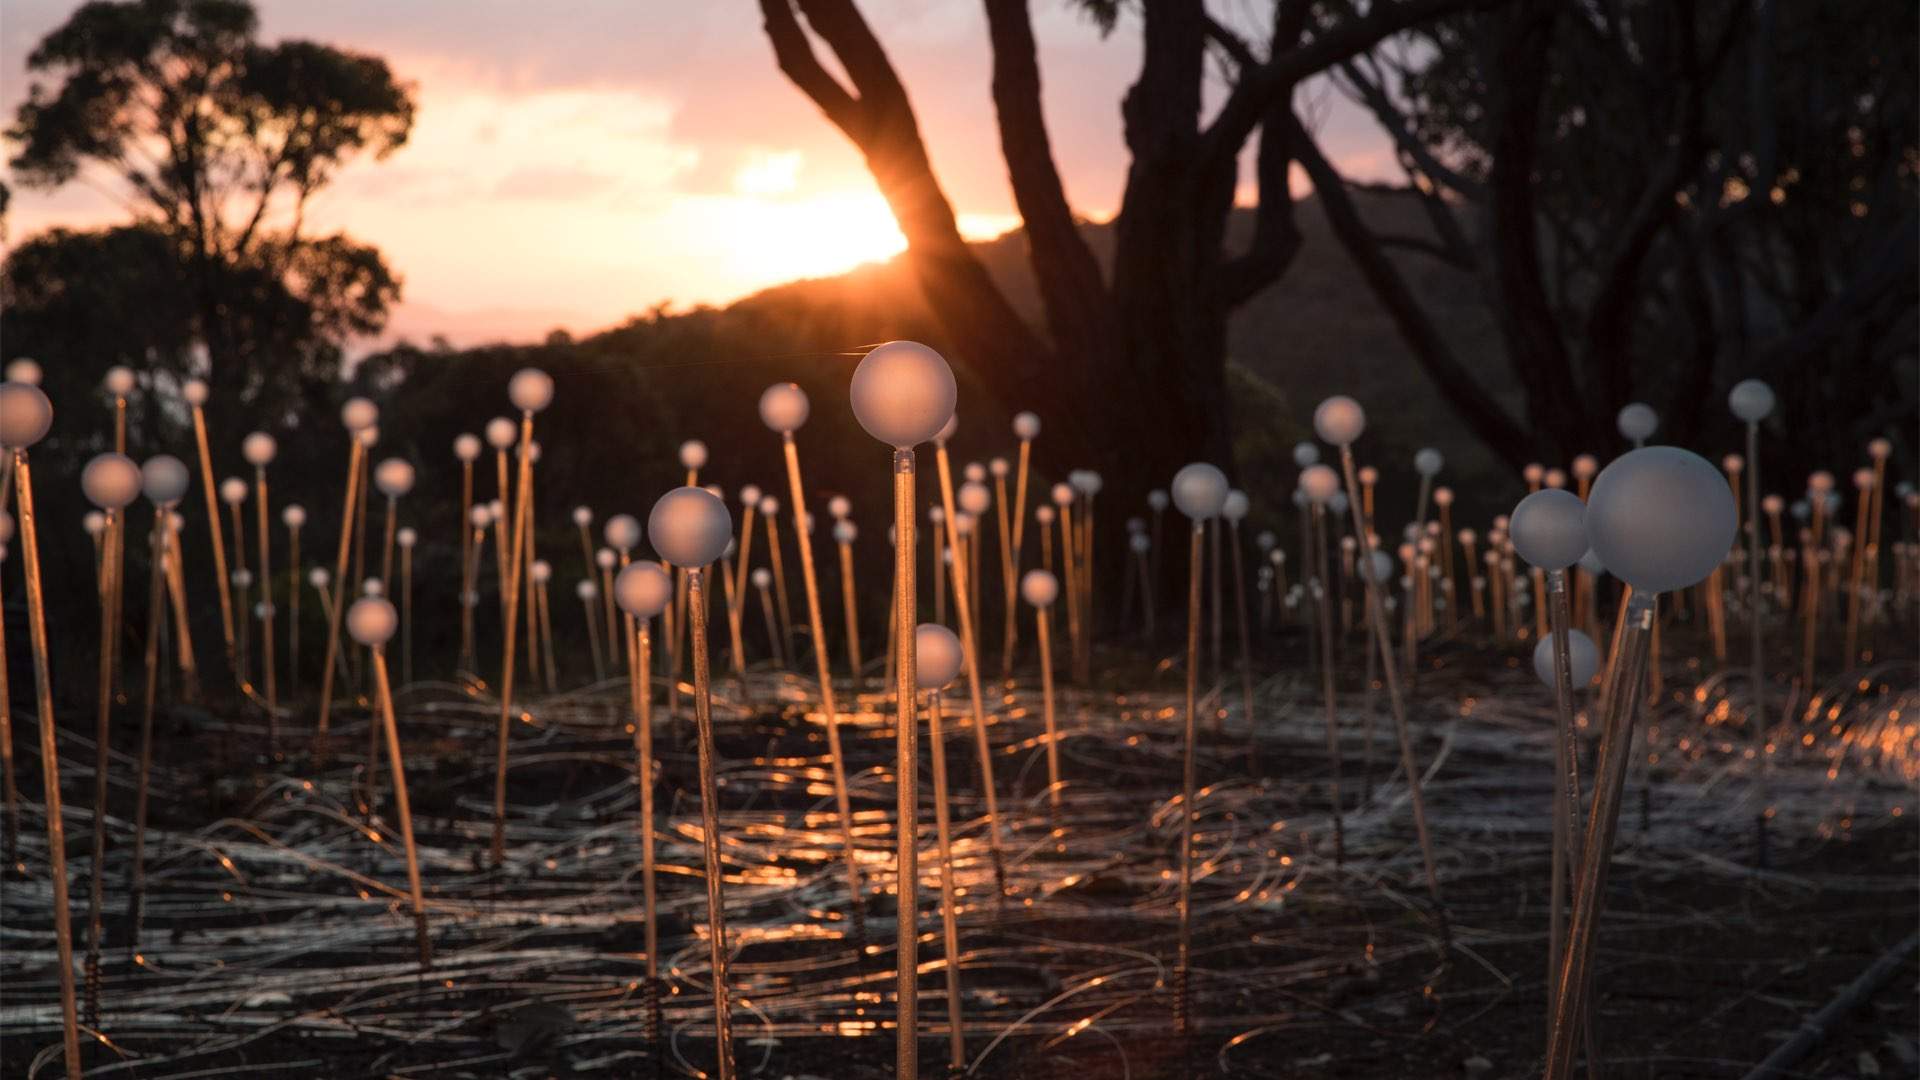 An Immersive New Installation from the Artist Behind Uluru's 'Field of Light' Has Arrived in Australia